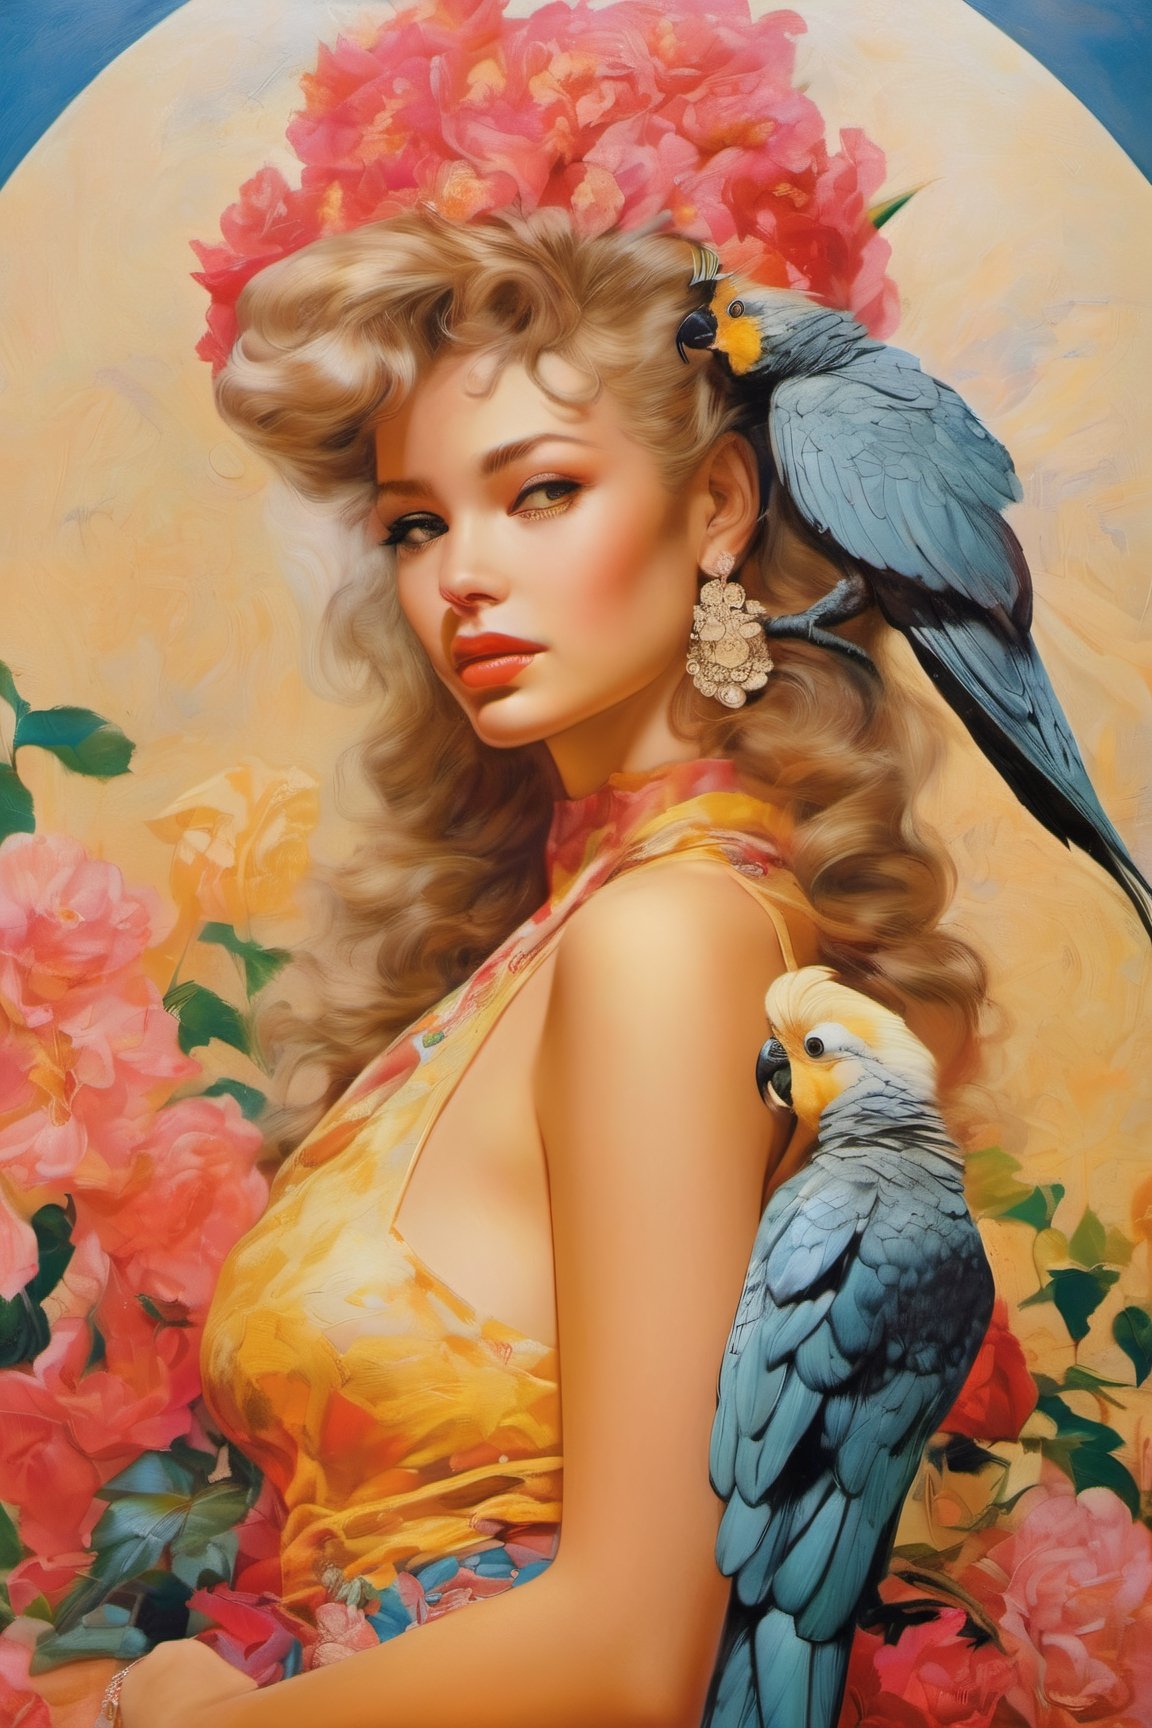 art by Masamune Shirow, art by J.C. Leyendecker, art by boris vallejo, a masterpiece, stunning beauty, hyper-realistic oil painting, vibrant colors, spanish women, 1950 art decor, 1950 art poster, black cockatoo, sulphur crested cockatoo, fashionistas, baroque style, art by armando huerta, art design by armando huertA,  tattoo by ed hardy, more detail XL,close up,Oil painting, 8k, highly detailed, Vogue style, a telephoto shot, 1000mm lens, f2,8,